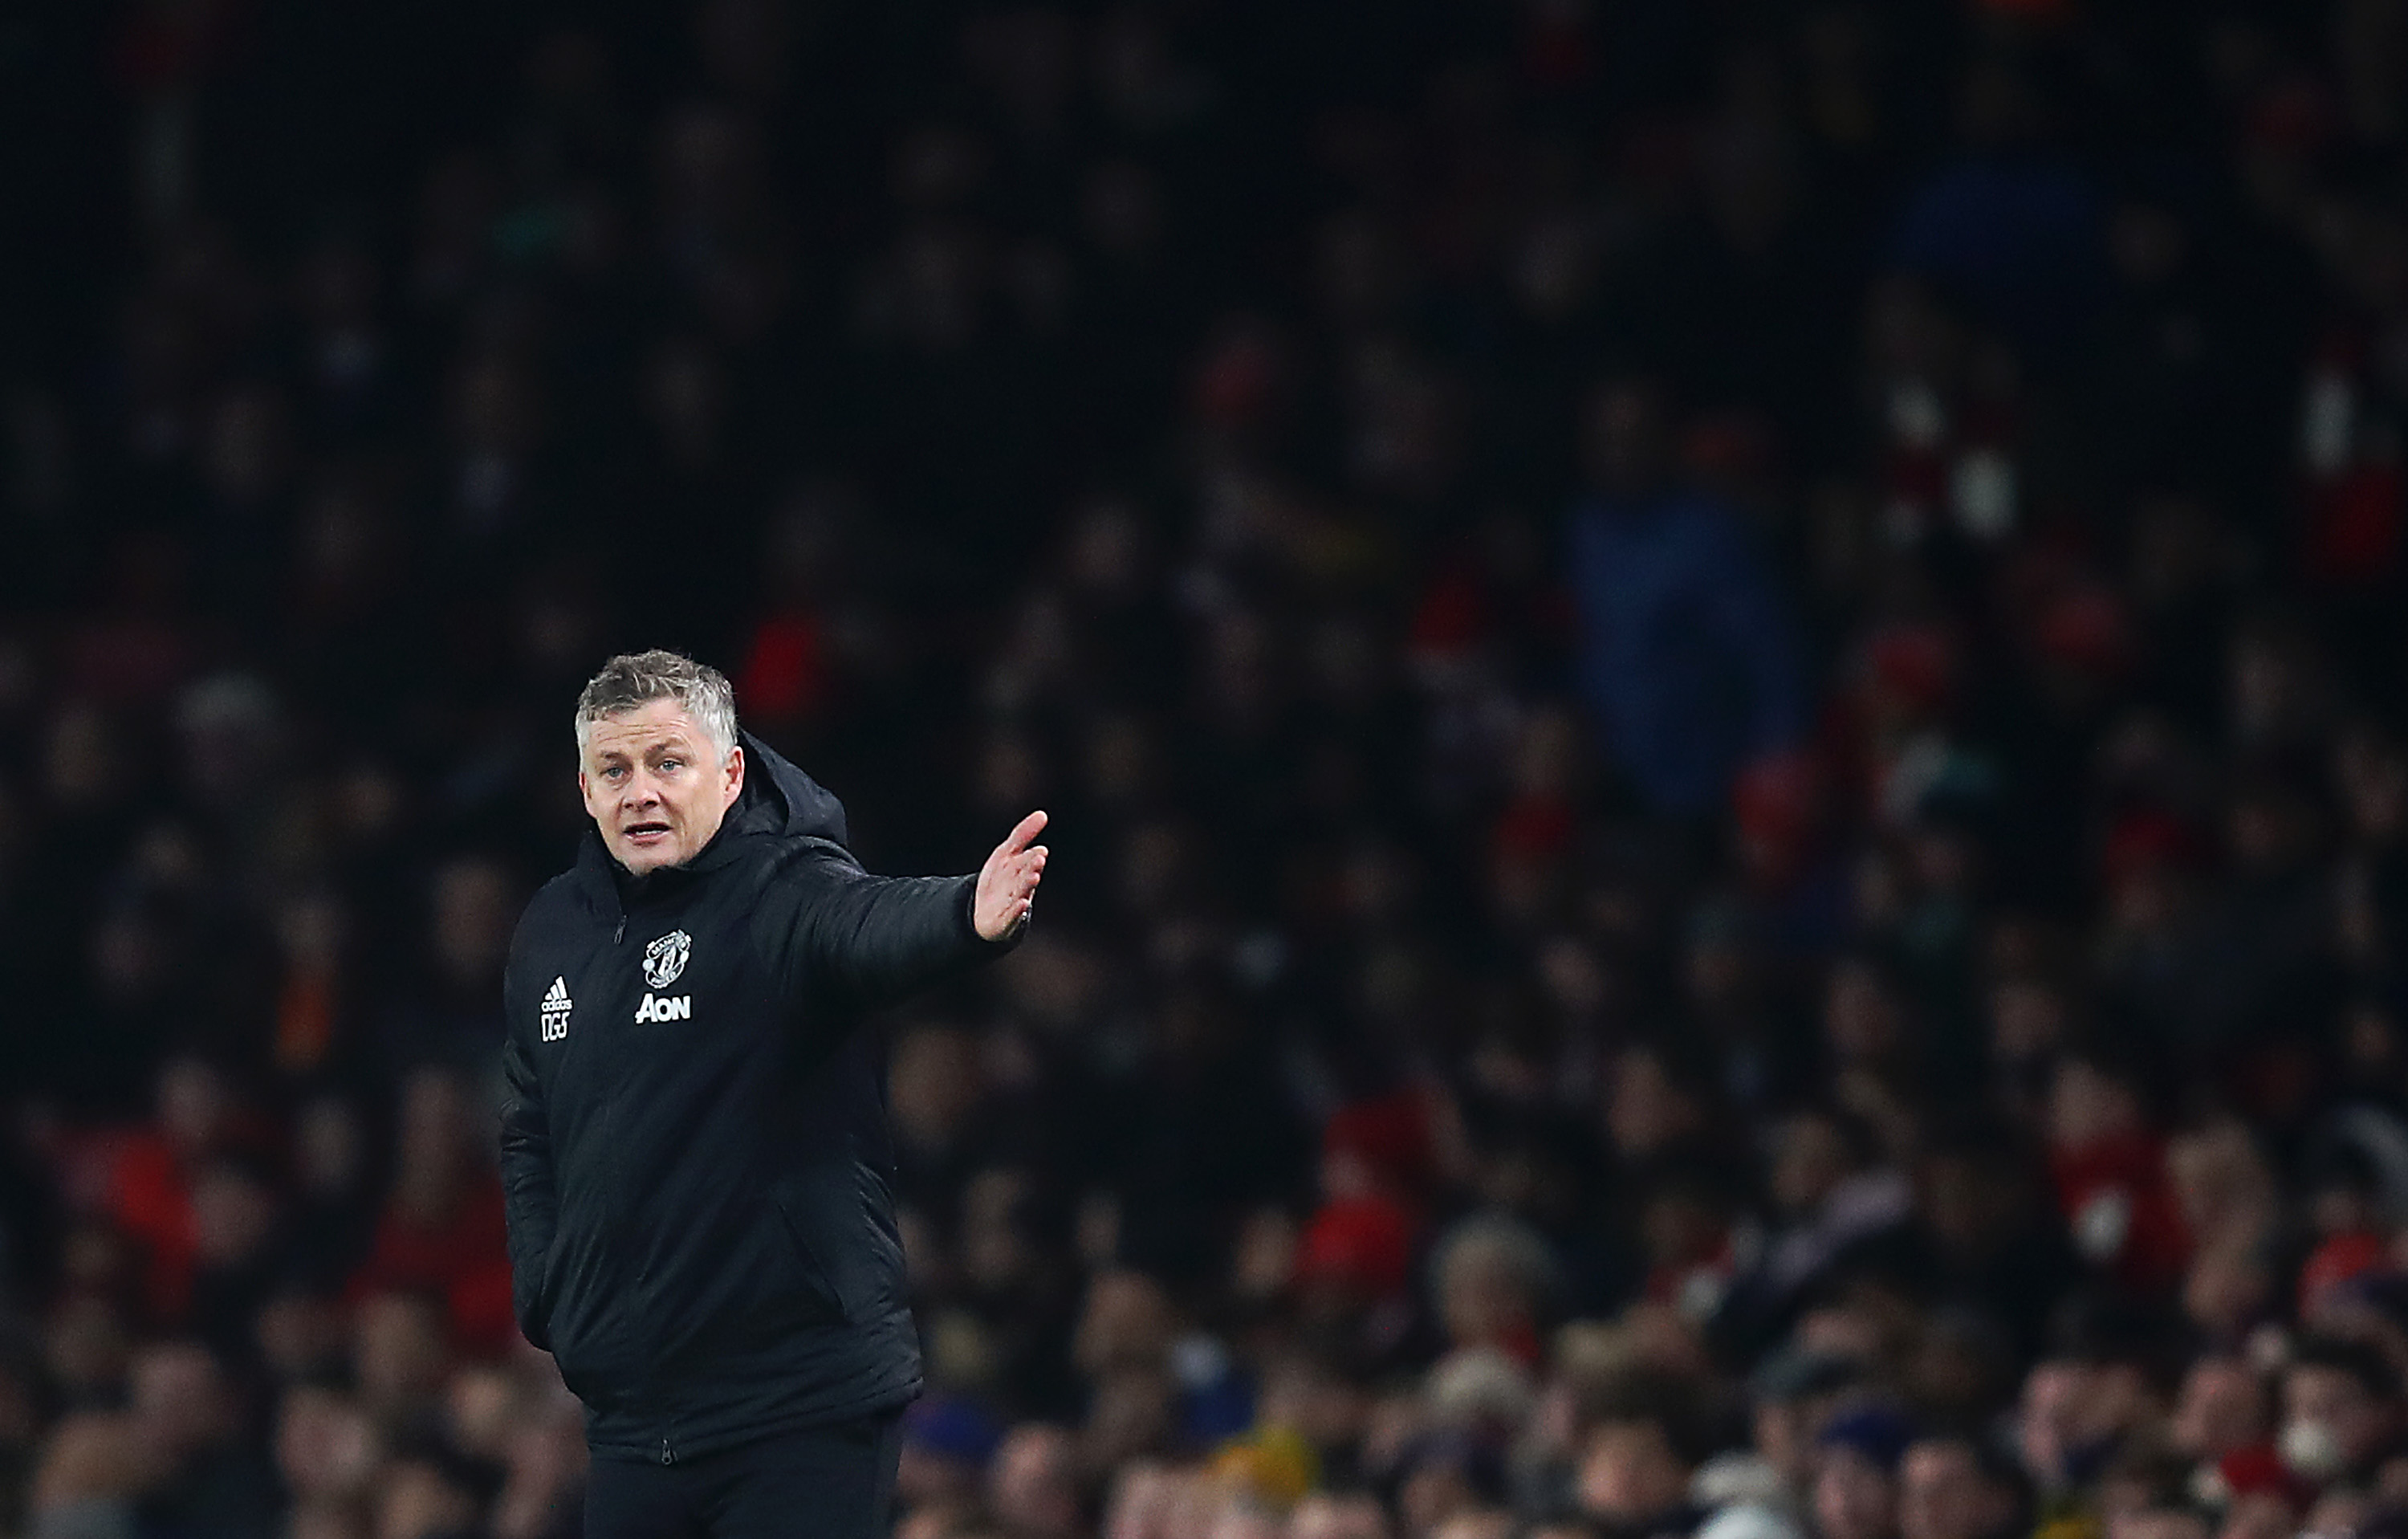 Ole Gunnar Solskjaer is ready to take Manchester United to the next level. (Photo by Julian Finney/Getty Images)